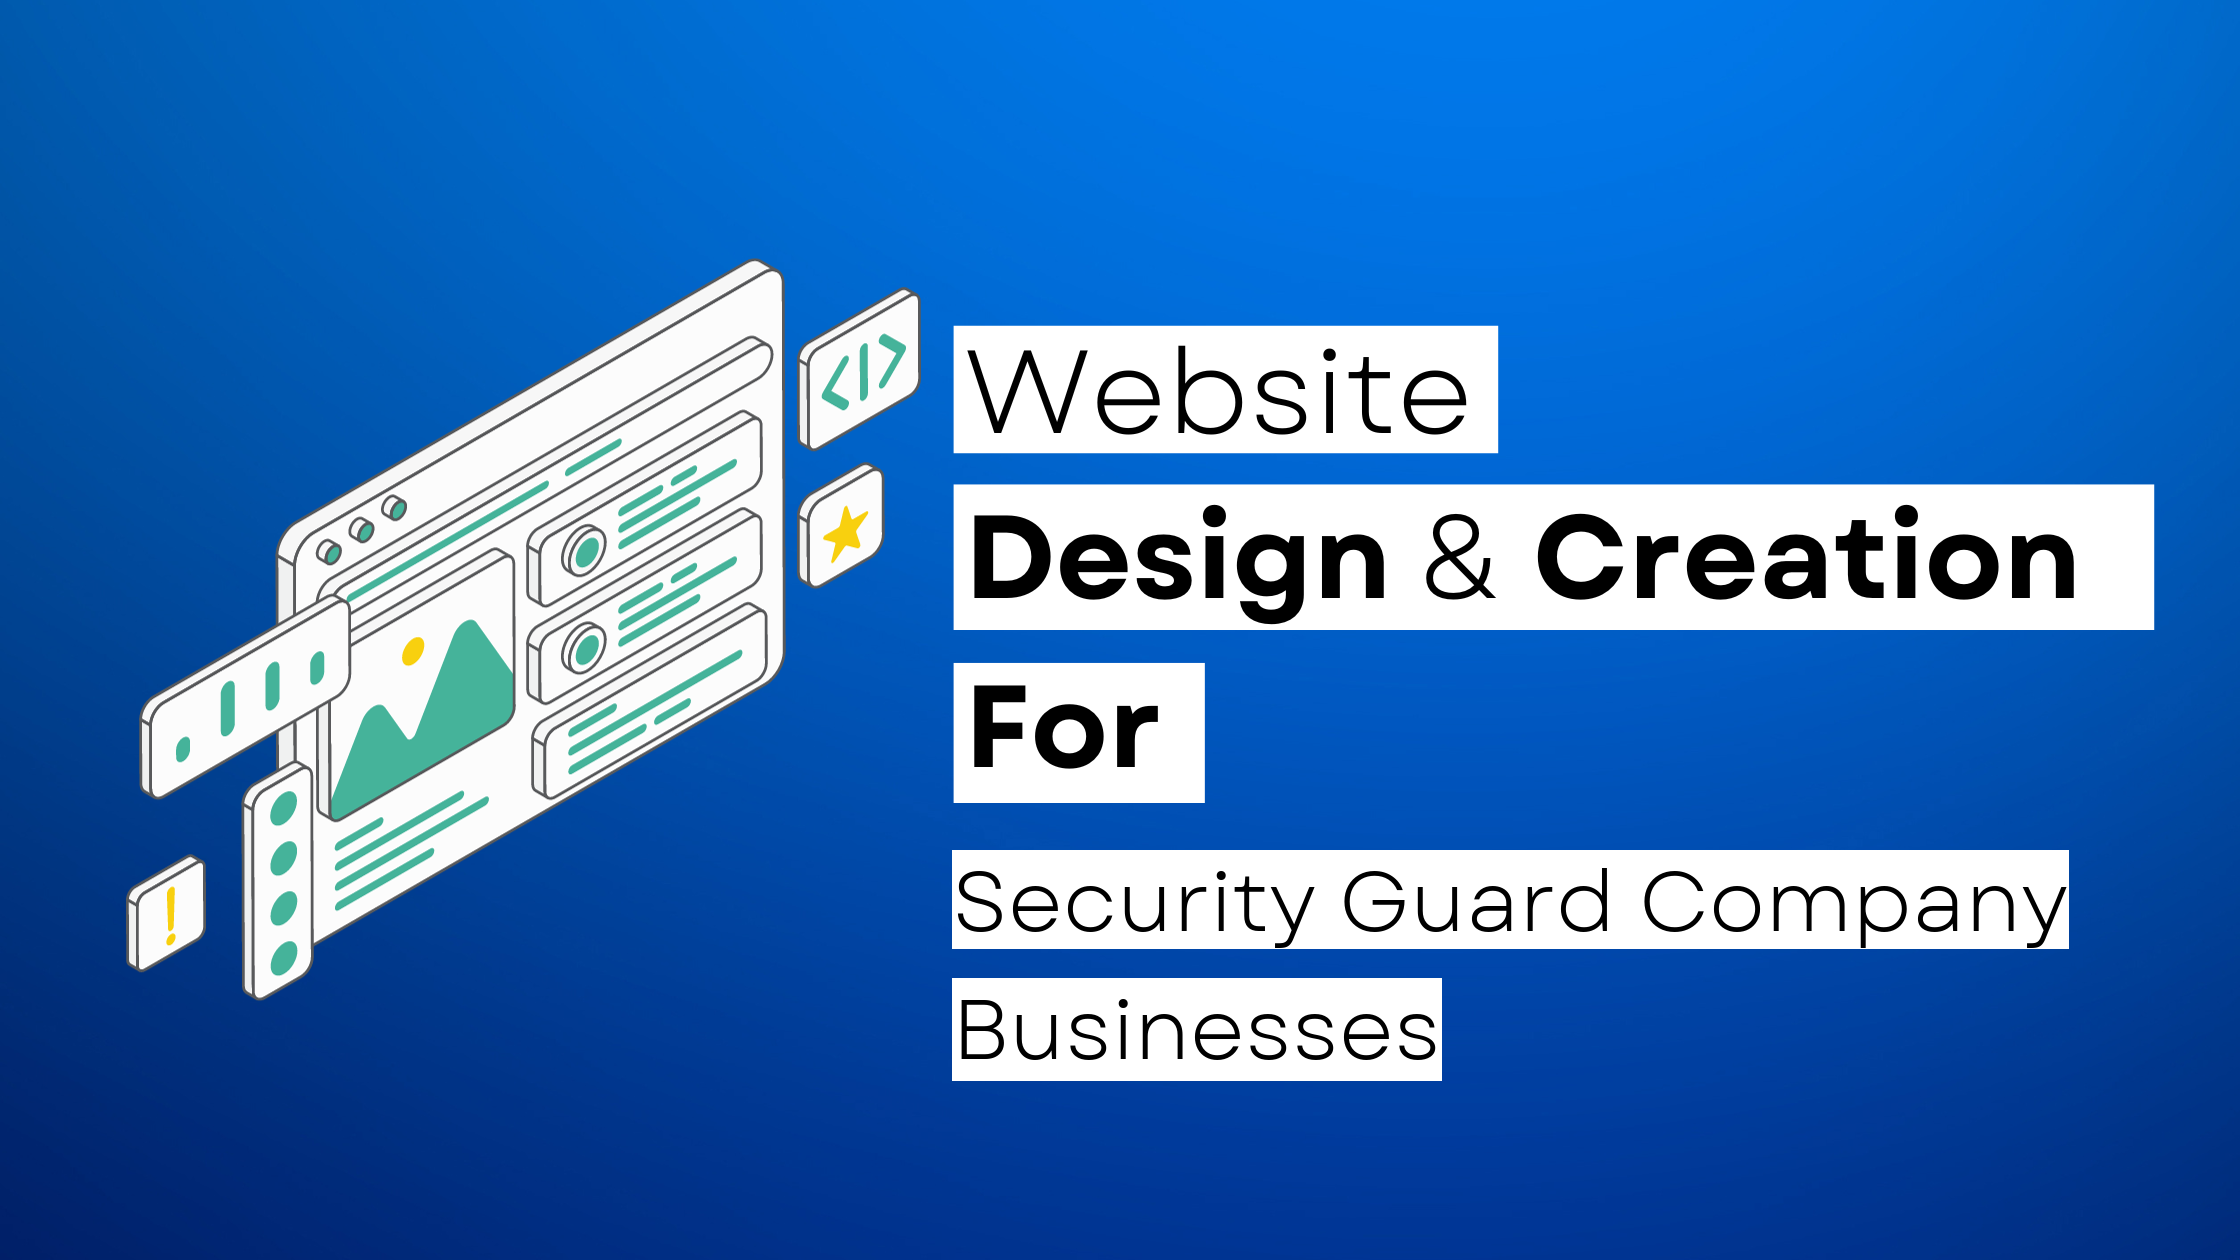 How to start a Security Guard Company website